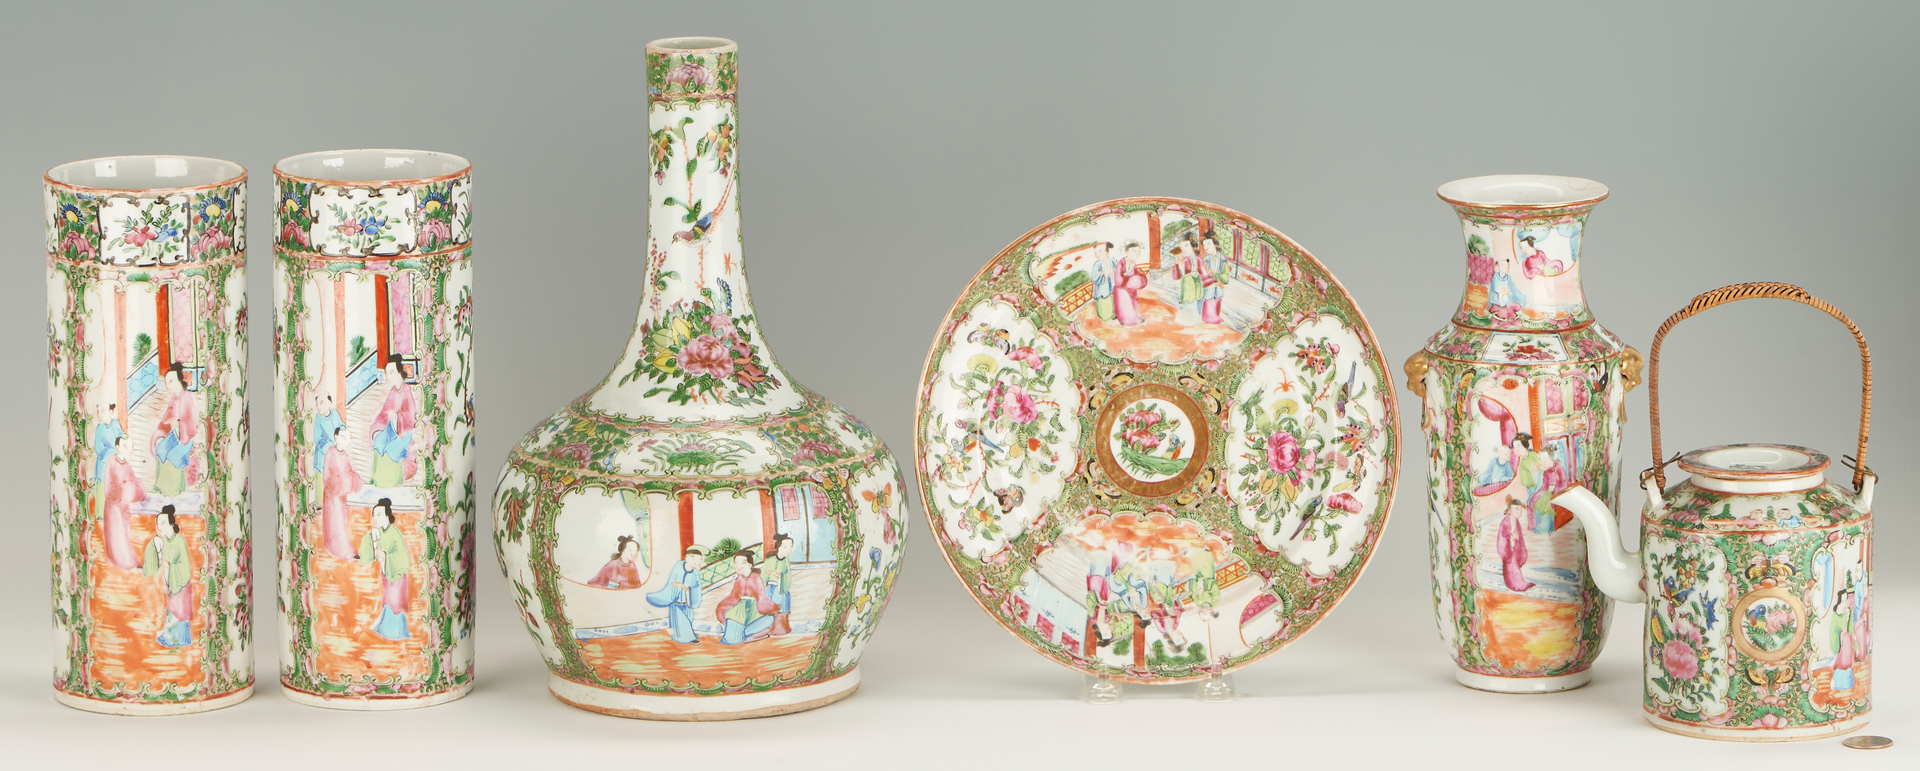 Lot 29: Six (6) Chinese Export Rose Medallion Porcelain Items